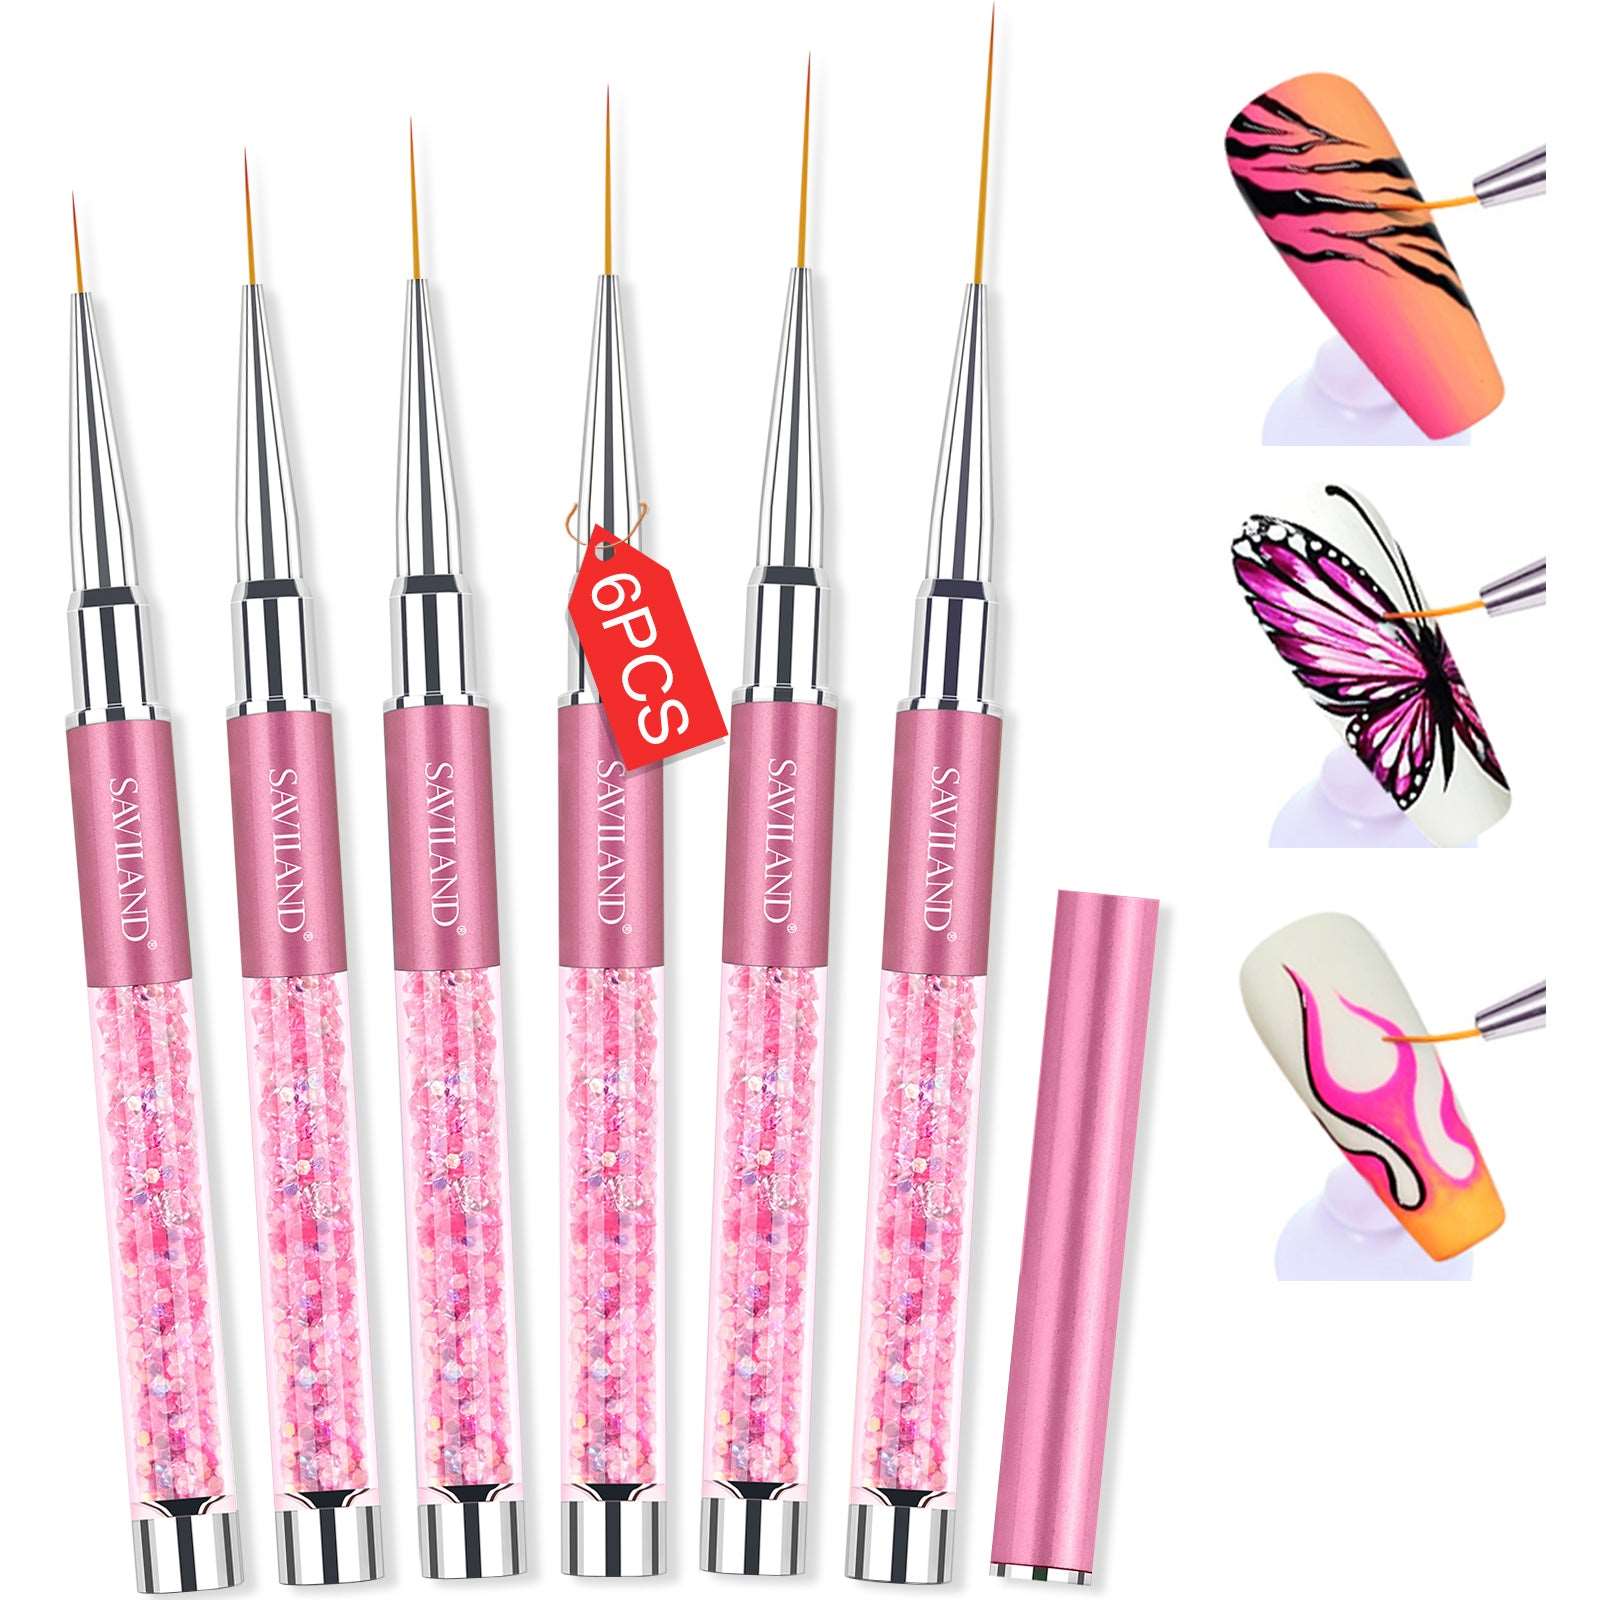 Unaone [3 Pack] Nail Art Brushes Set, Nail Art Liner Pen Painting Brushes  Striping for Drawing Lines, Short Strokes, Protector Lid includes, Rose  Gold - Yahoo Shopping